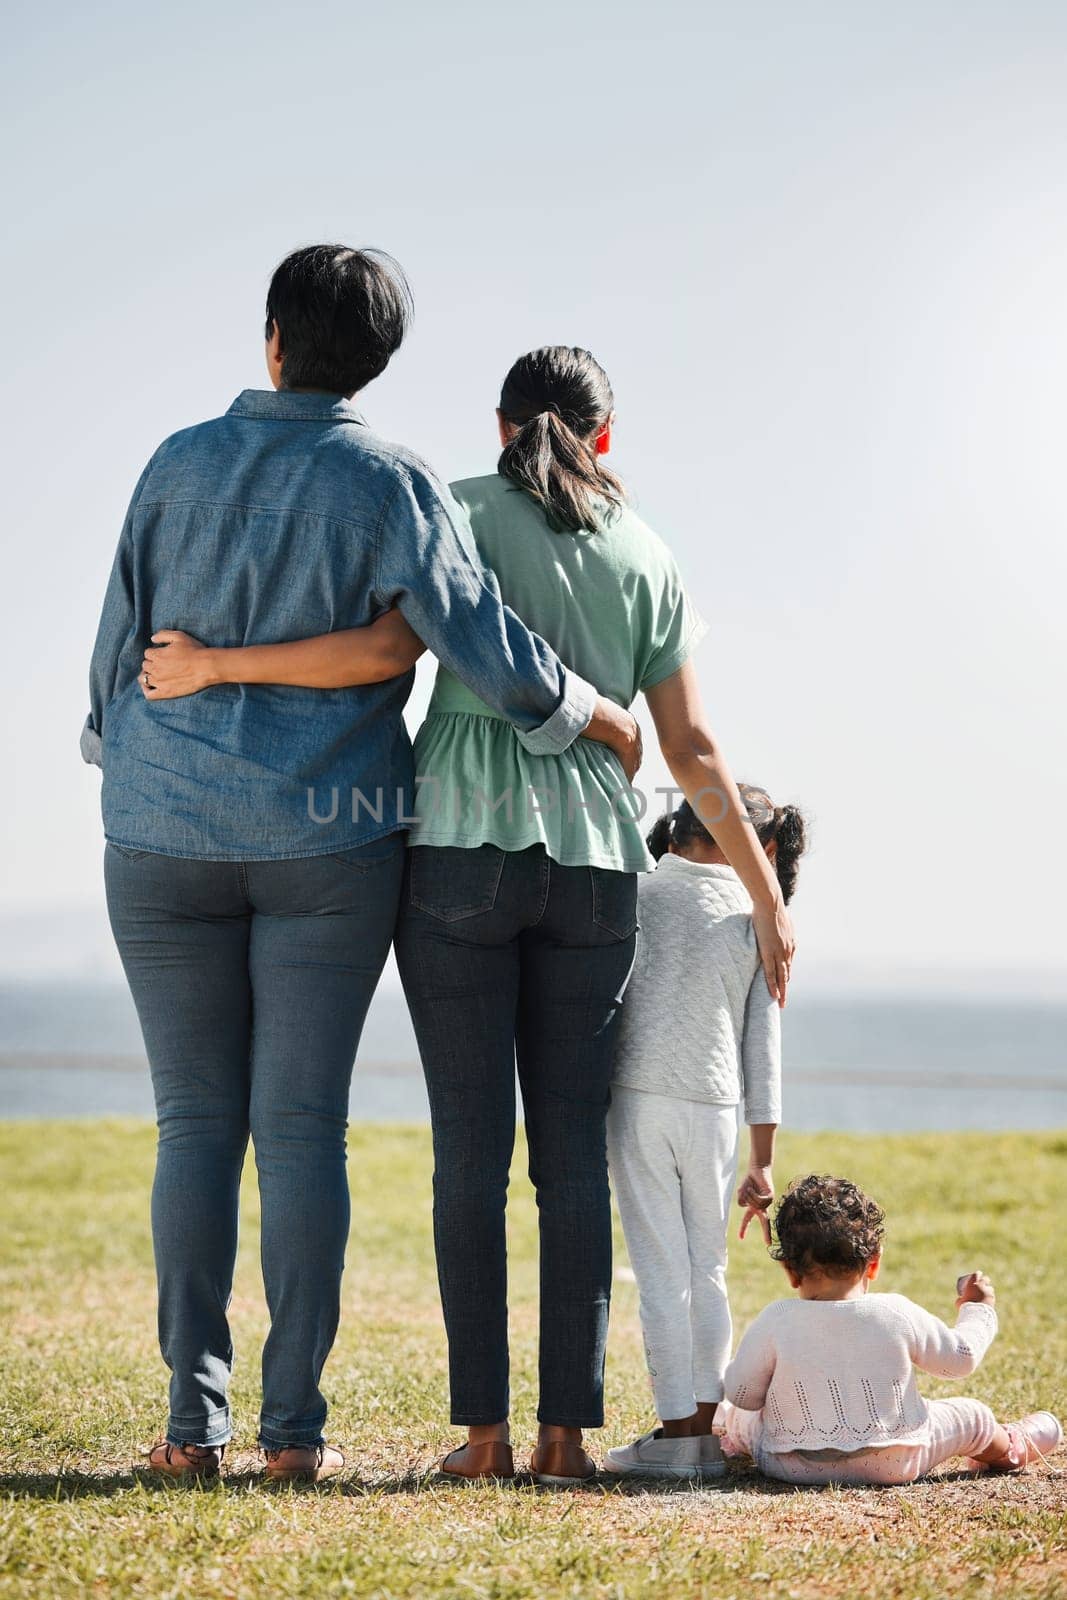 Park, nature and back view of family on grass outdoors with relatives spending quality time together. Love, support and caring grandma, mom and girl with baby bonding together with scenic ocean view. by YuriArcurs